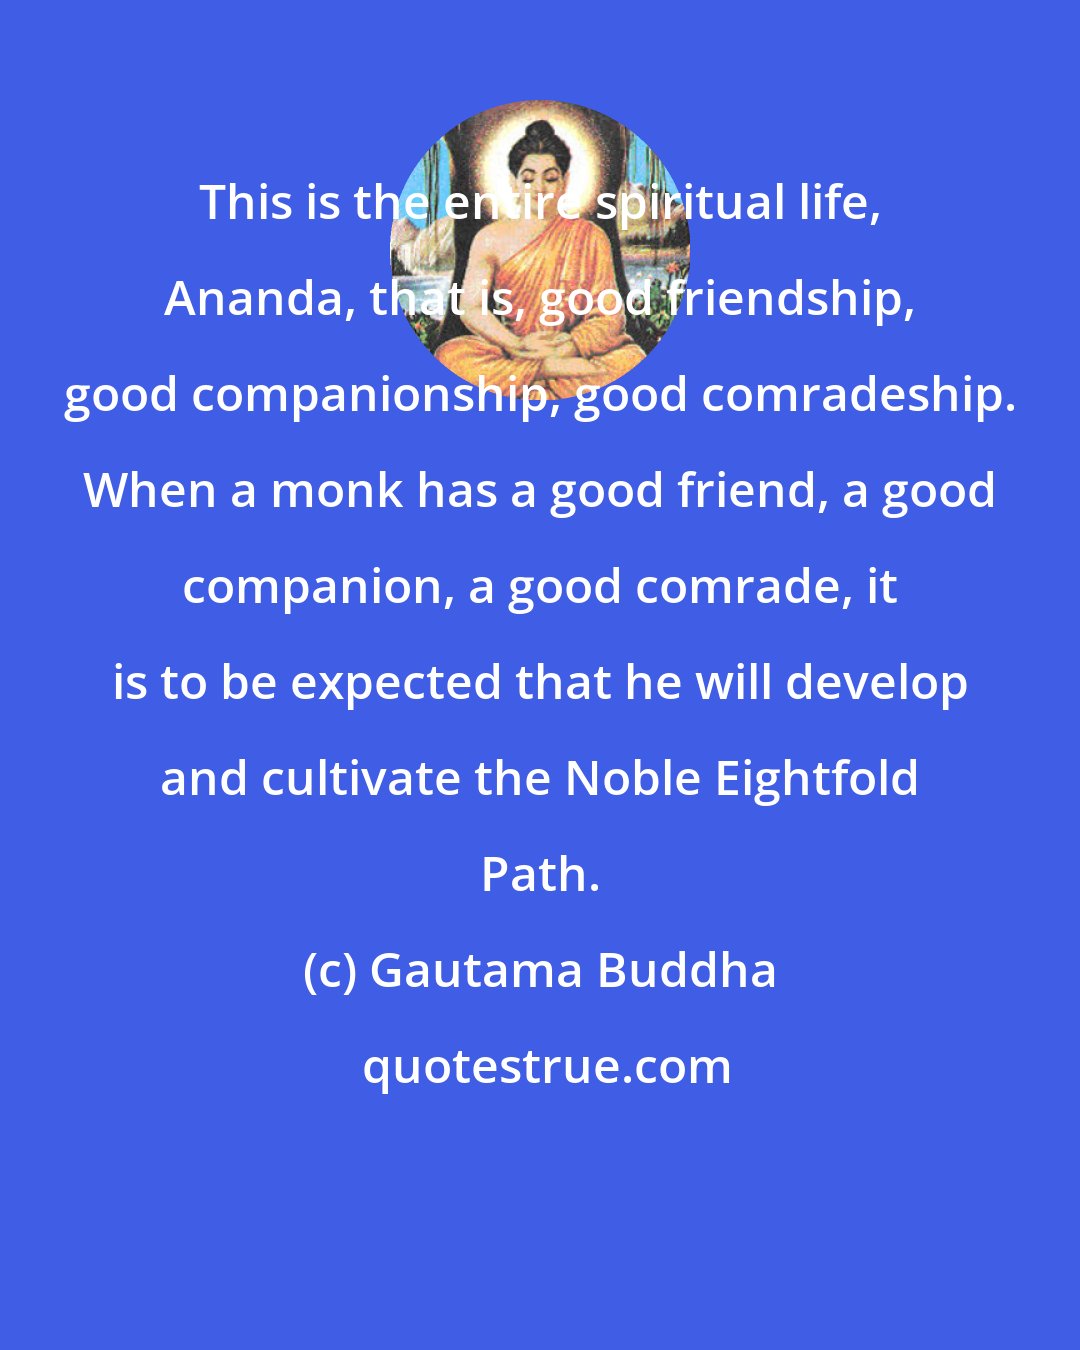 Gautama Buddha: This is the entire spiritual life, Ananda, that is, good friendship, good companionship, good comradeship. When a monk has a good friend, a good companion, a good comrade, it is to be expected that he will develop and cultivate the Noble Eightfold Path.